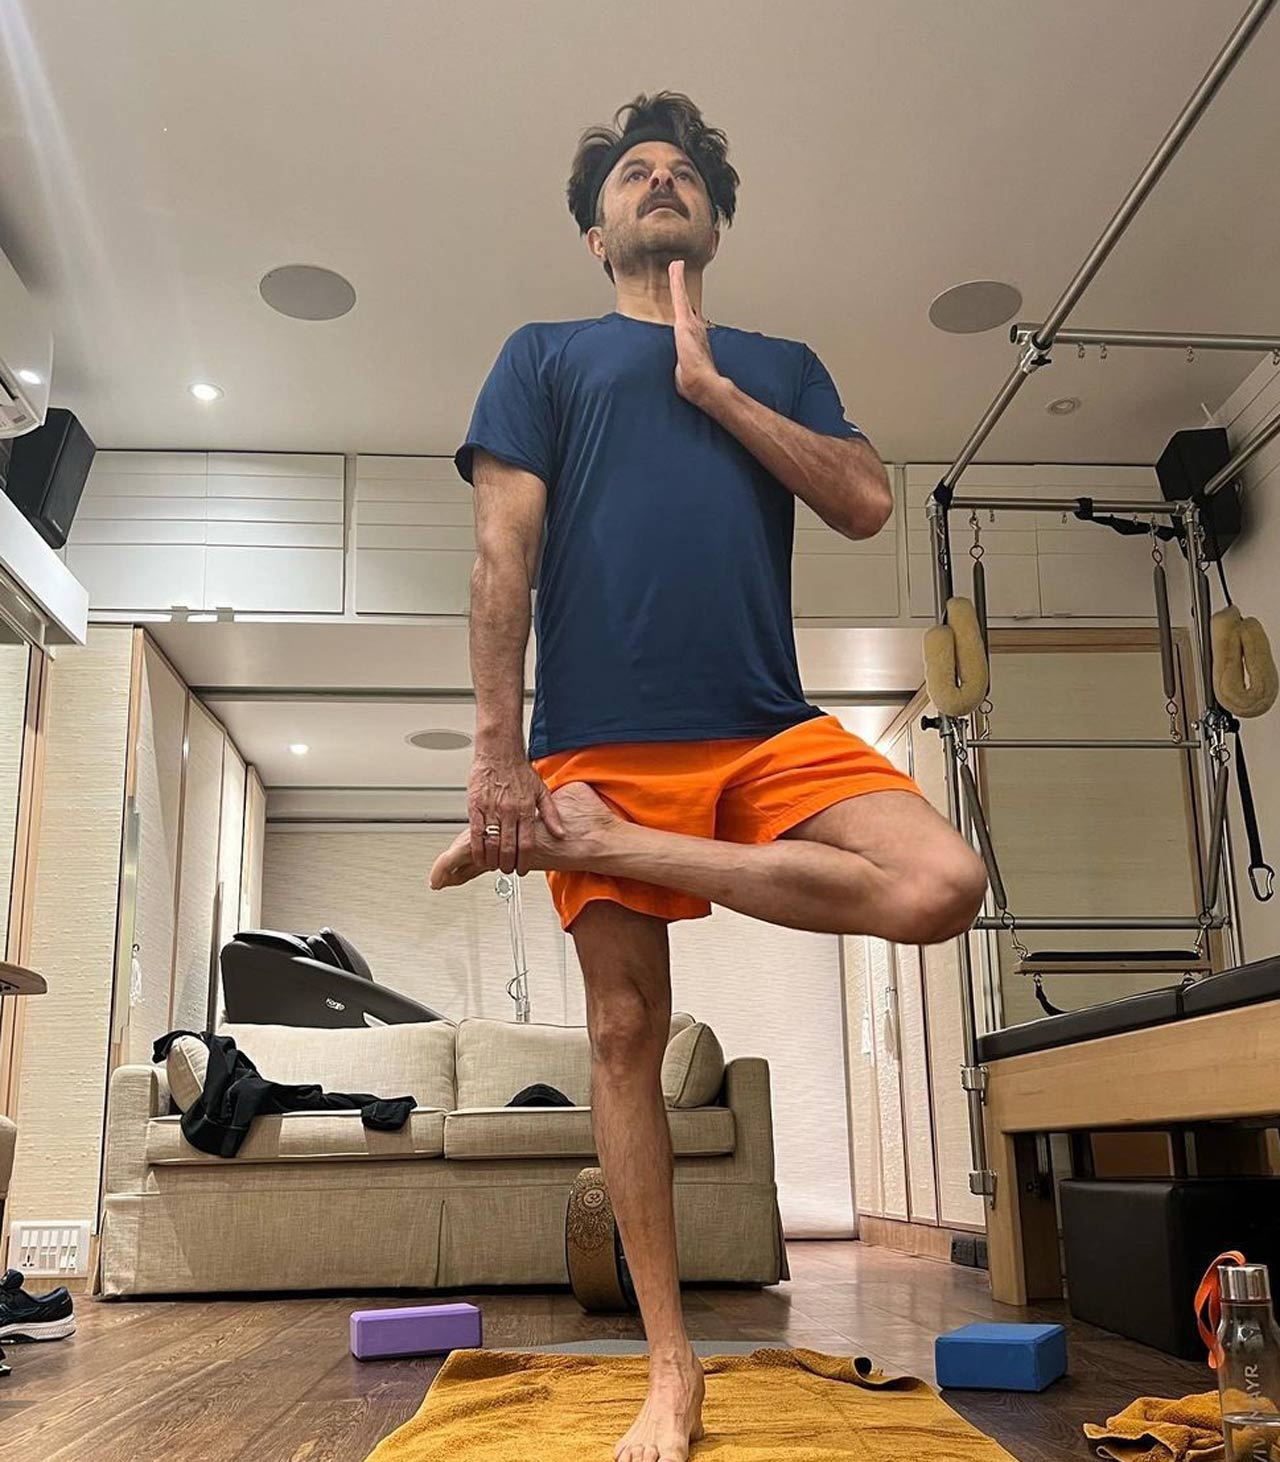 Anil Kapoor is also celebrating the event to the fullest, as he shares glimpses acing various yoga asanas on social media. On Tuesday, the 65-year-old actor who is well known for his timeless grooming secrets took to his Instagram handle and shared a series of images from his vanity van, as he could be seen performing yoga asanas and exercises. In the caption, Anil shared his secret to leading a happy and healthy life. He wrote, 